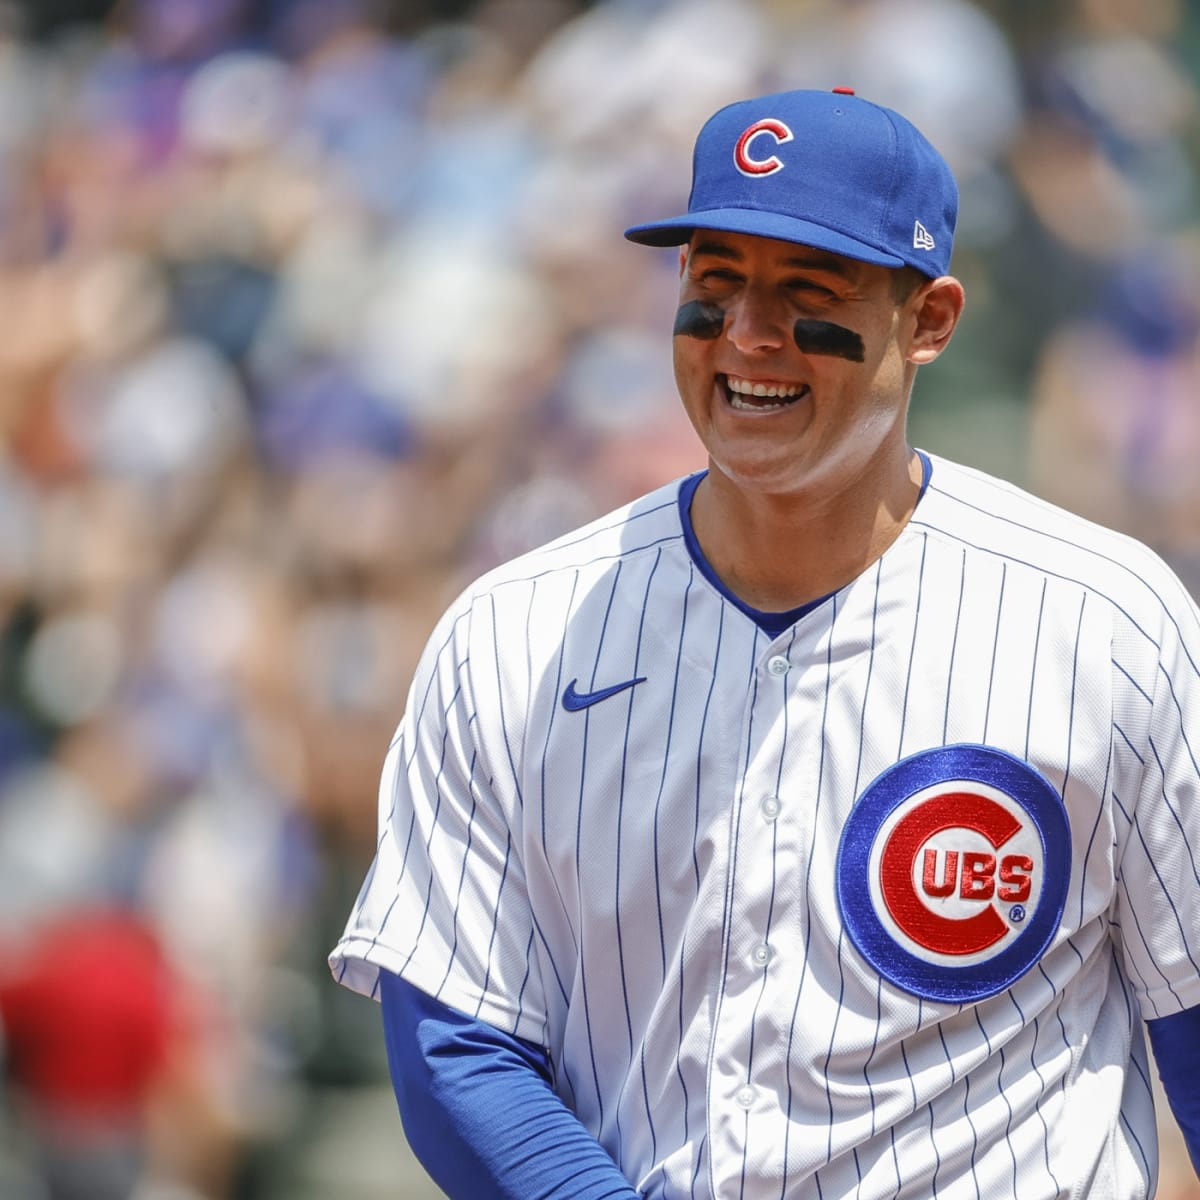 Anthony Rizzo has earned Yankees lovefest that awaits him